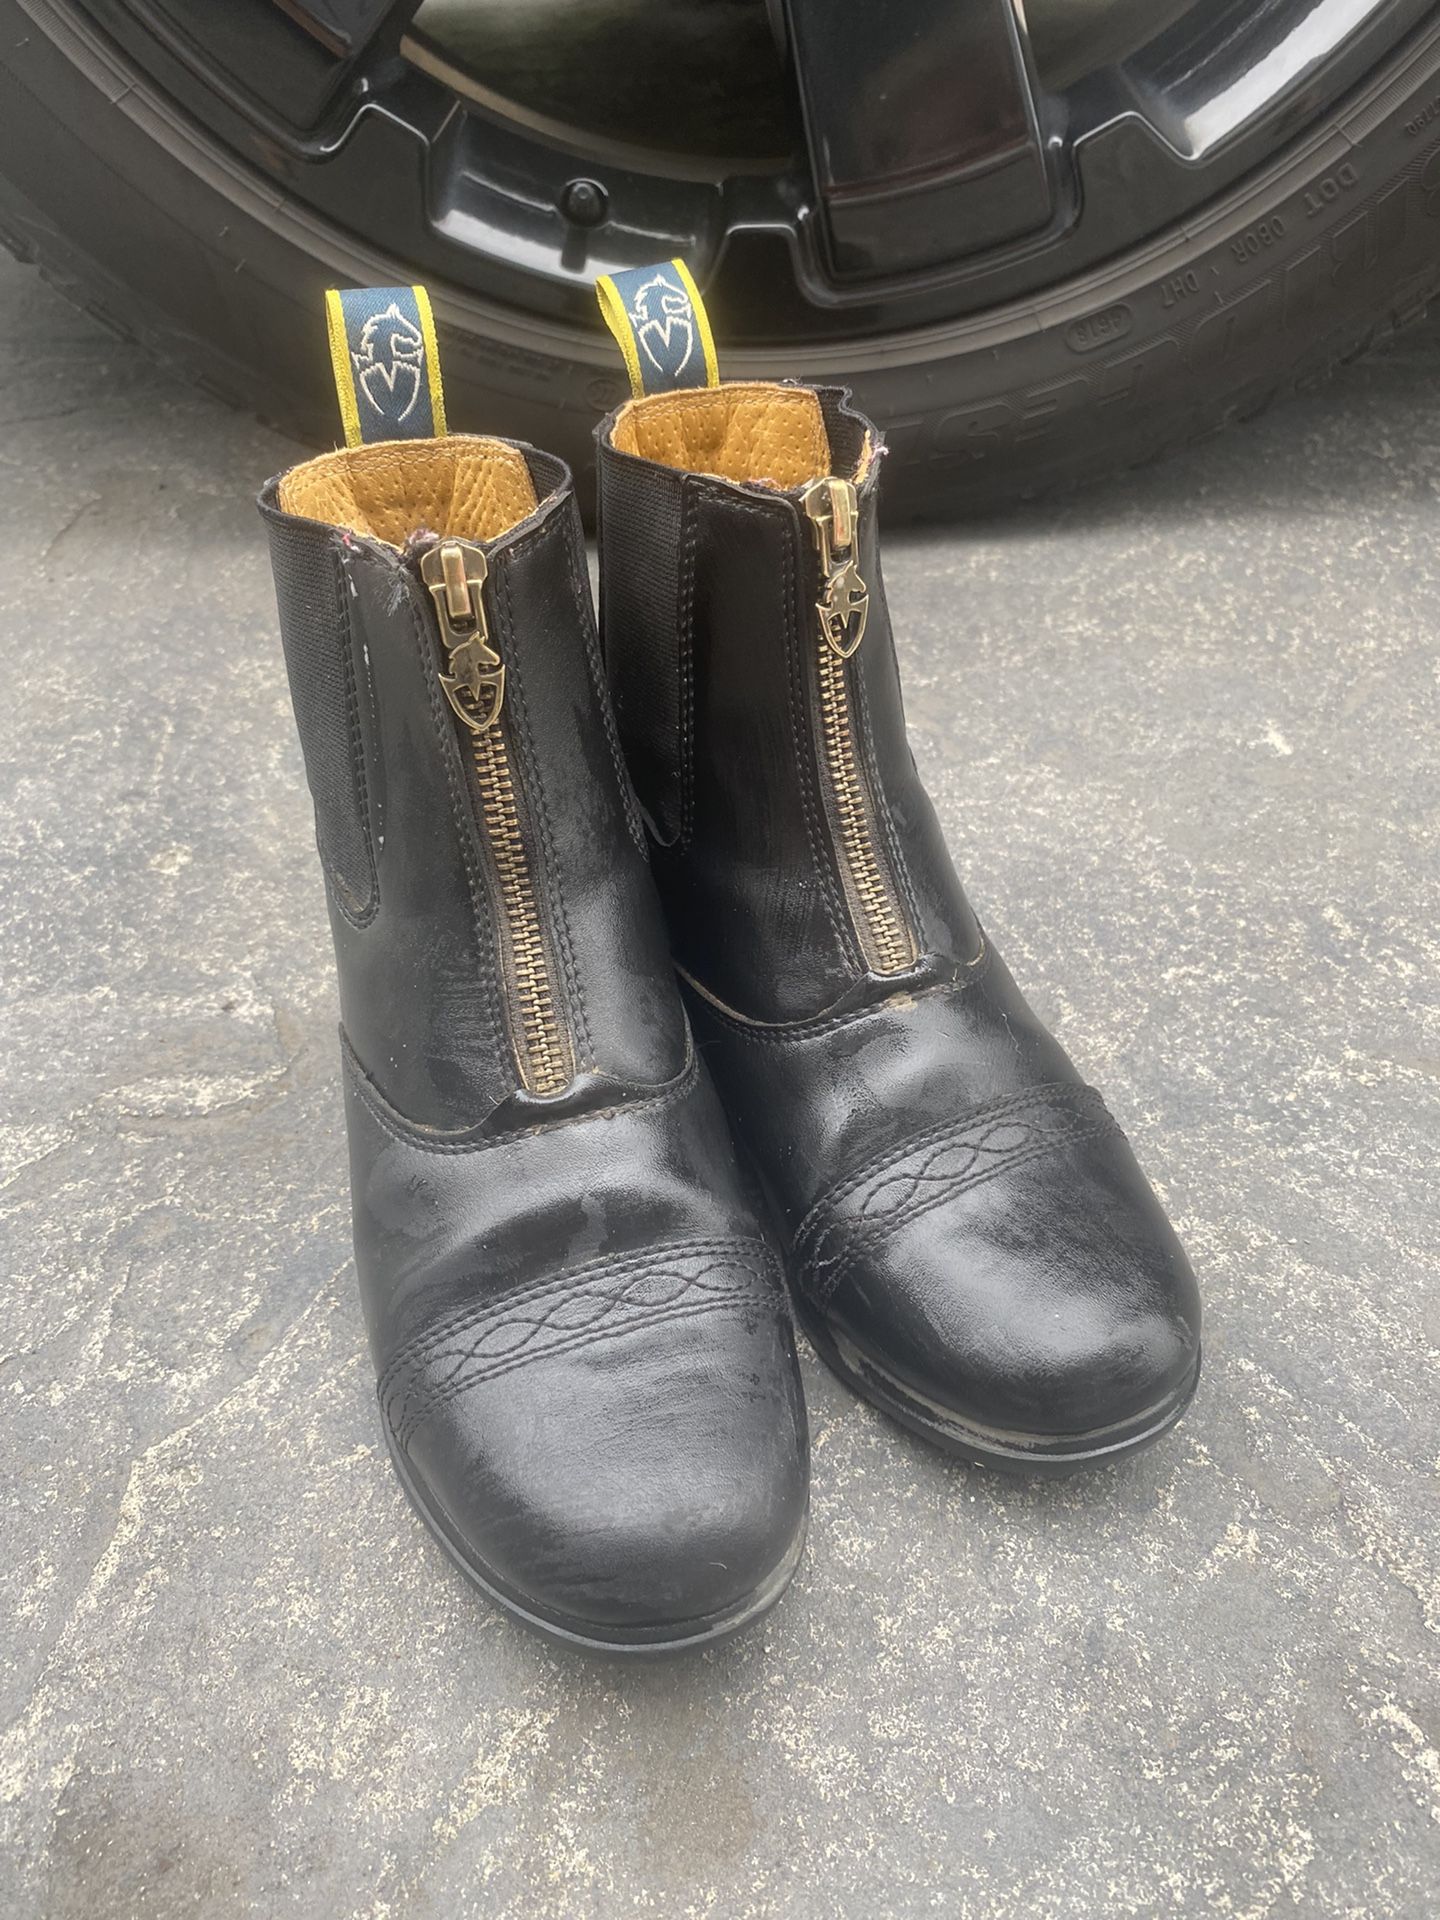 Moretta Riding Boots Size 1 Youth